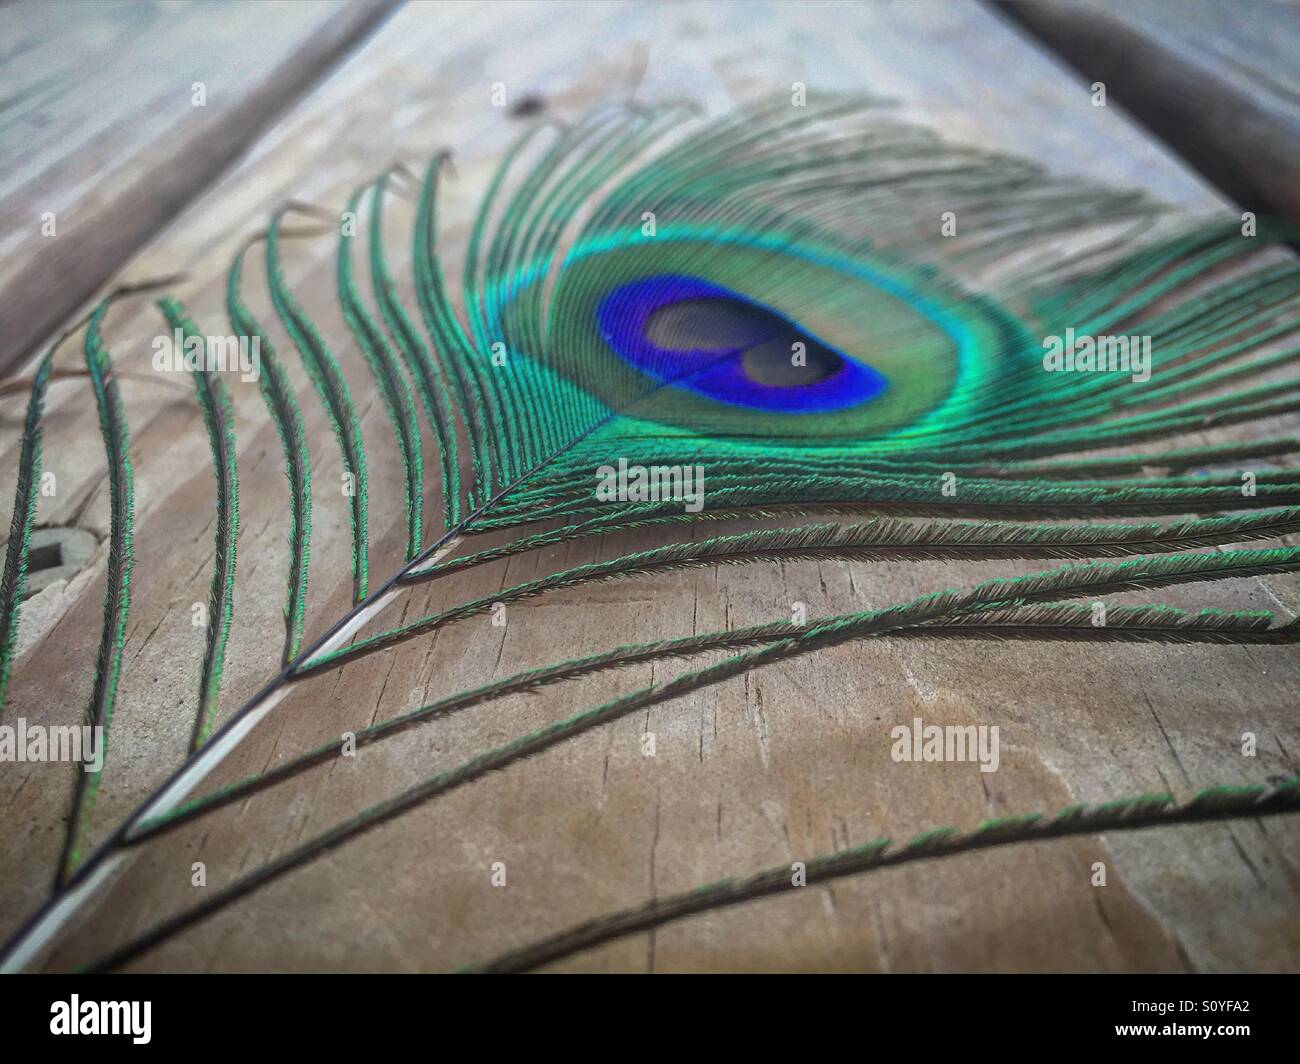 Colorful peacock feather against rustic wood. Stock Photo